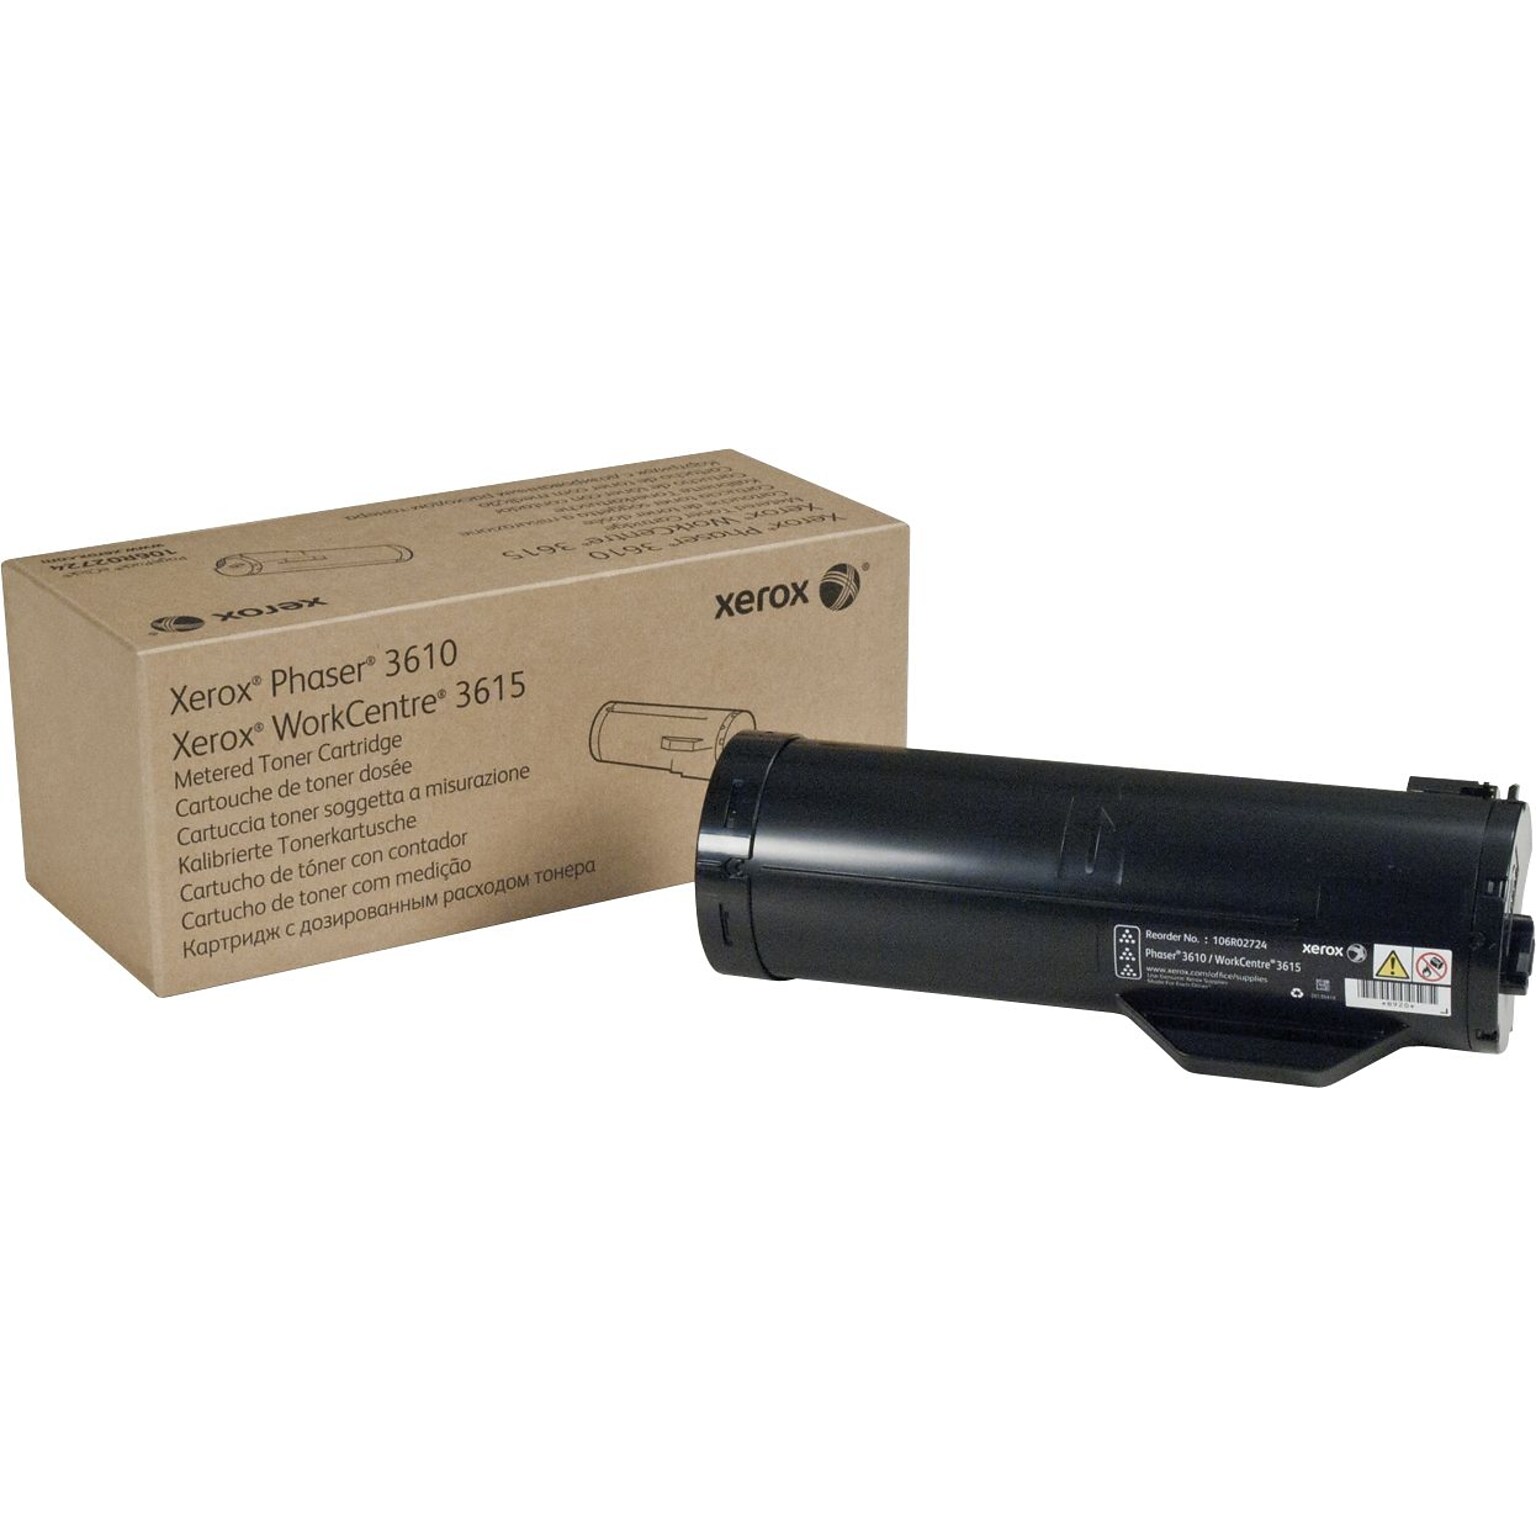 Xerox 106R02731 Black Extra High Yield Toner Cartridge, Prints Up to 25,300 Pages (XER106R02731)